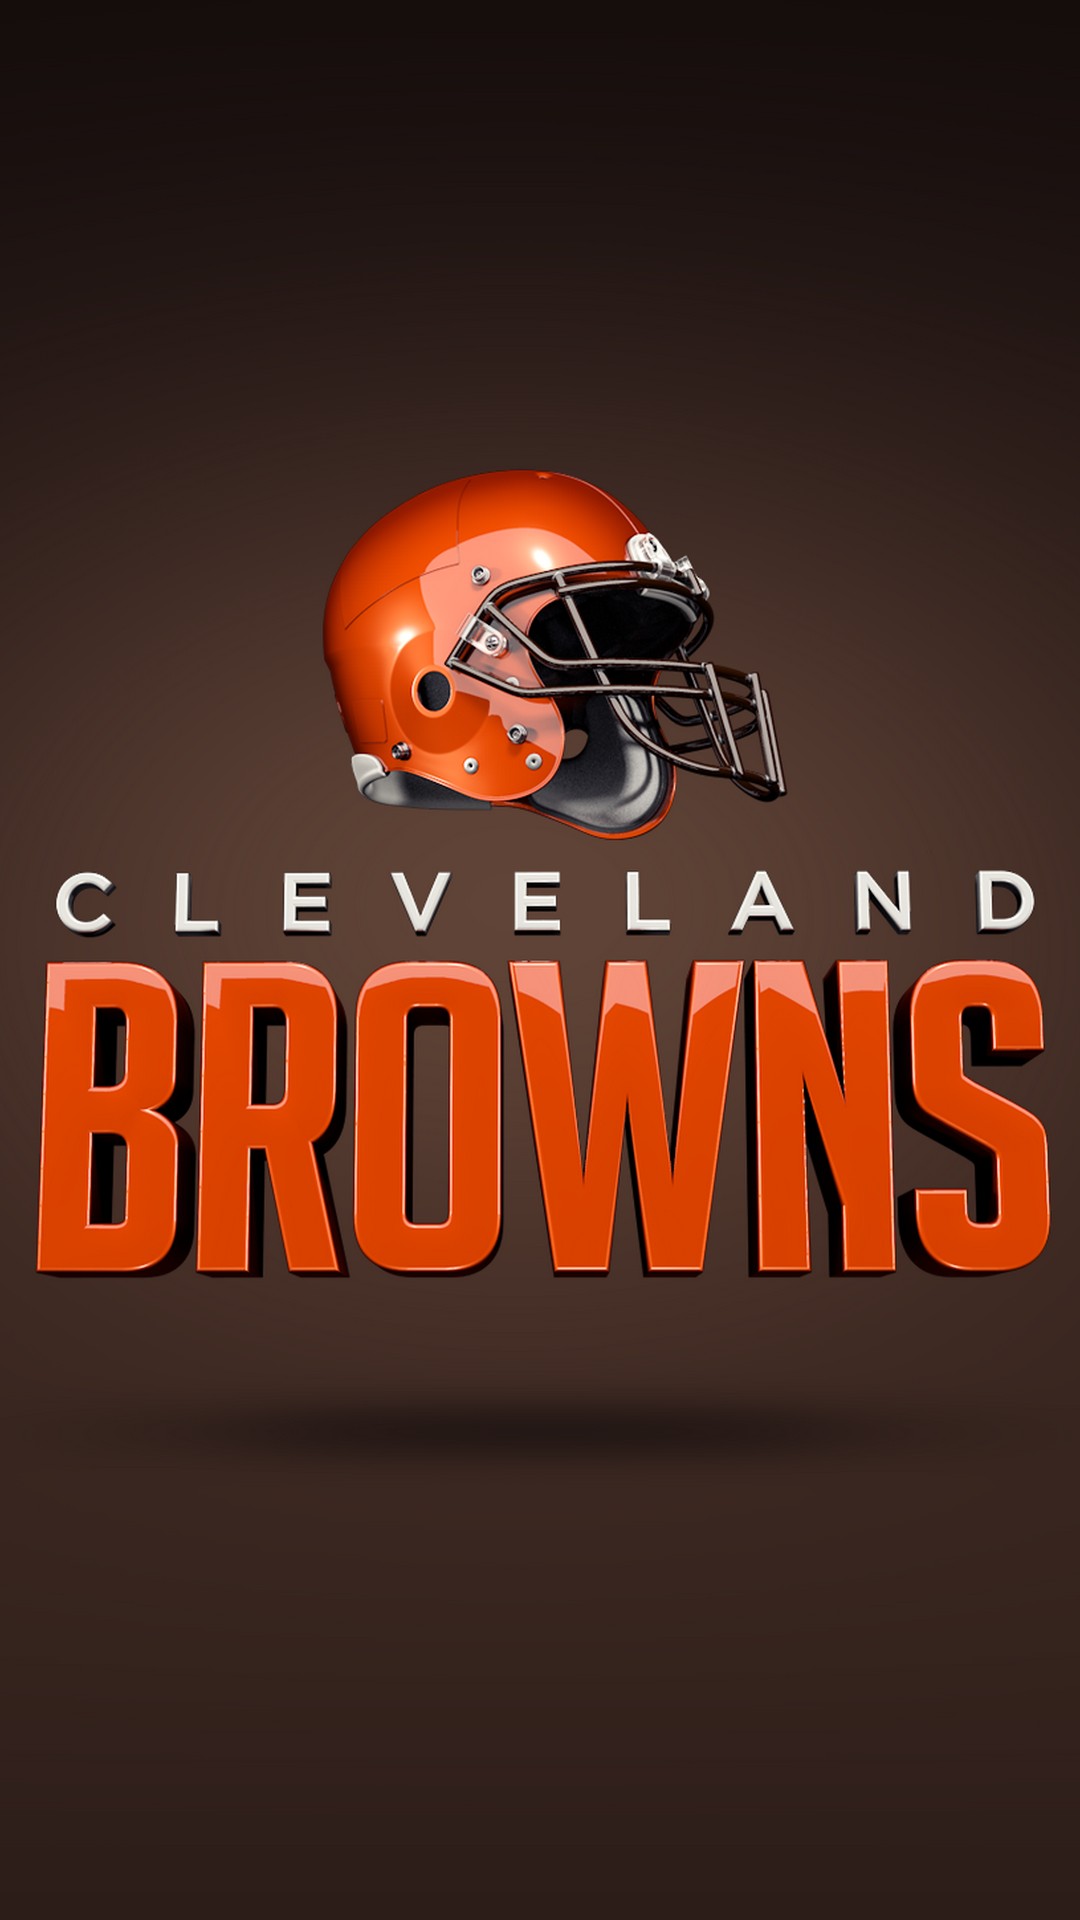 Cleveland Browns iPhone 8 Plus Wallpaper with high-resolution 1080x1920 pixel. Download and set as wallpaper for Apple iPhone X, XS Max, XR, 8, 7, 6, SE, iPad, Android